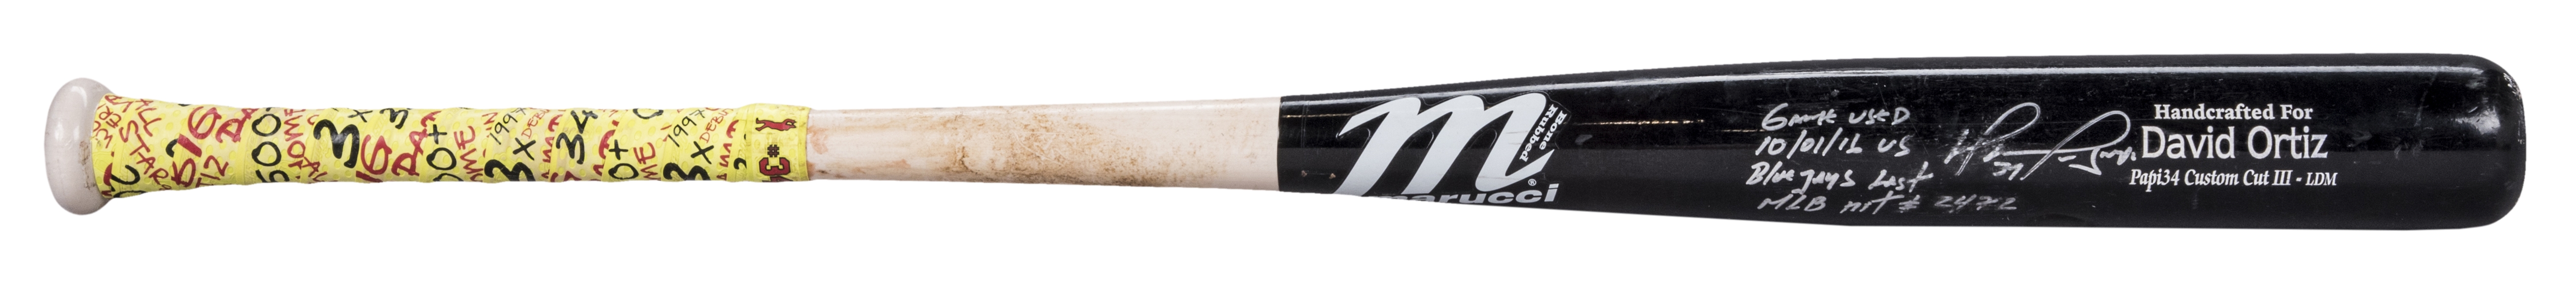 2016 David Ortiz Game Used, Signed & Inscribed Final Career Hit Bat (#2472) Used On 10/01/2016 For Hit #2472 (MLB Authenticated & Fanatics)